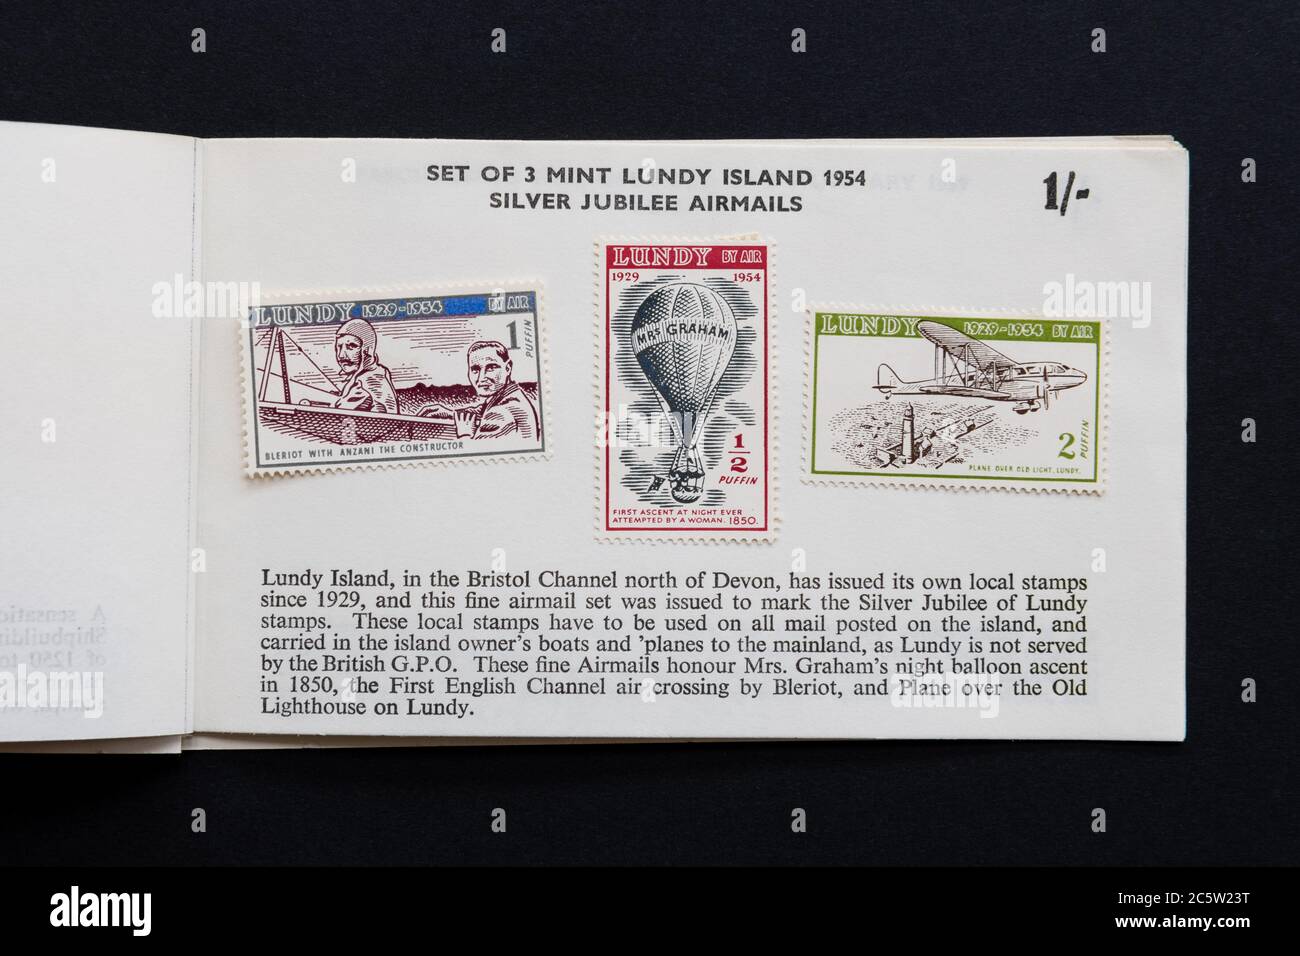 Francobolli Universal Stamp Co Eastrington Special Approval - 3 menta Lundy Island 1954 Argento Jubilee Airmails Foto Stock